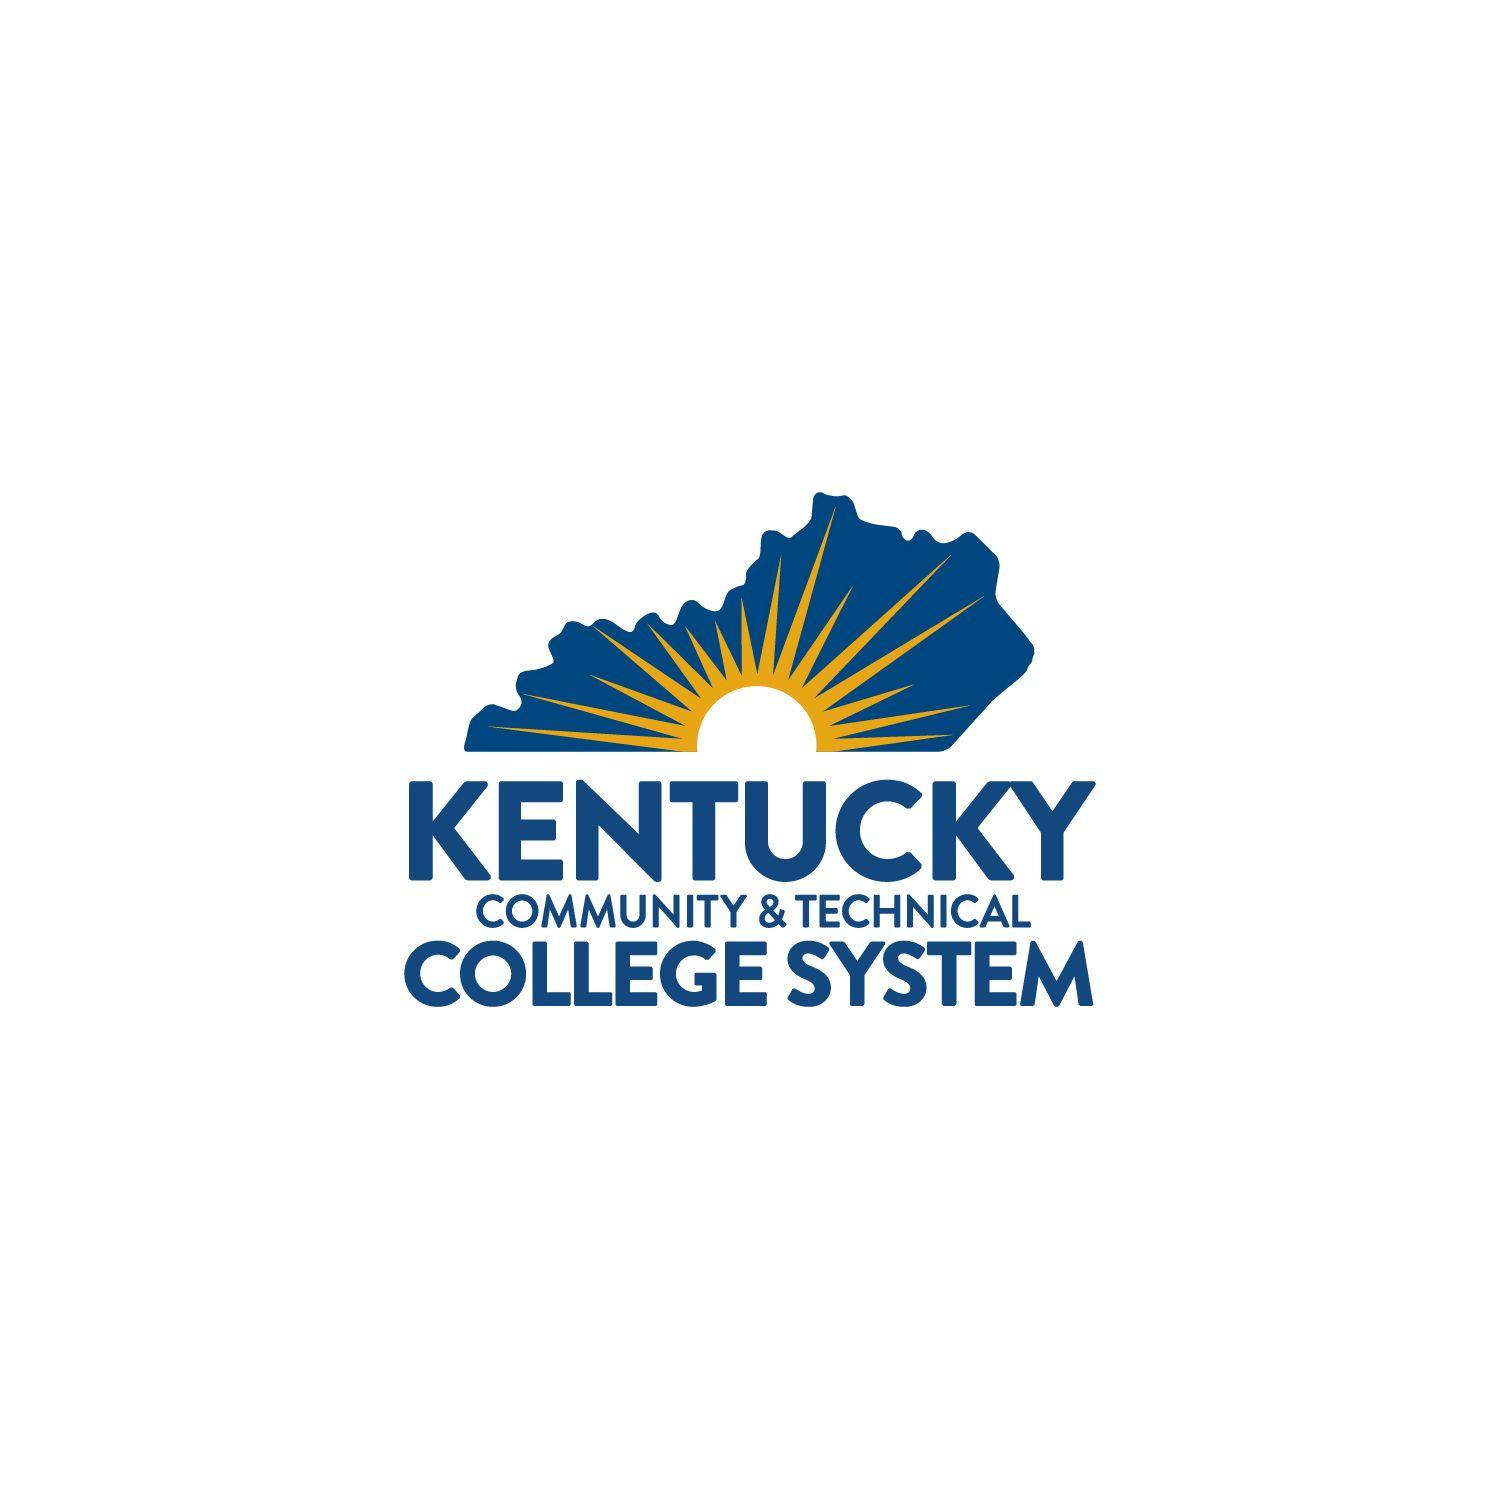 KCTCS Logo - KCTCS gains $66 million in energy savings over 10 years